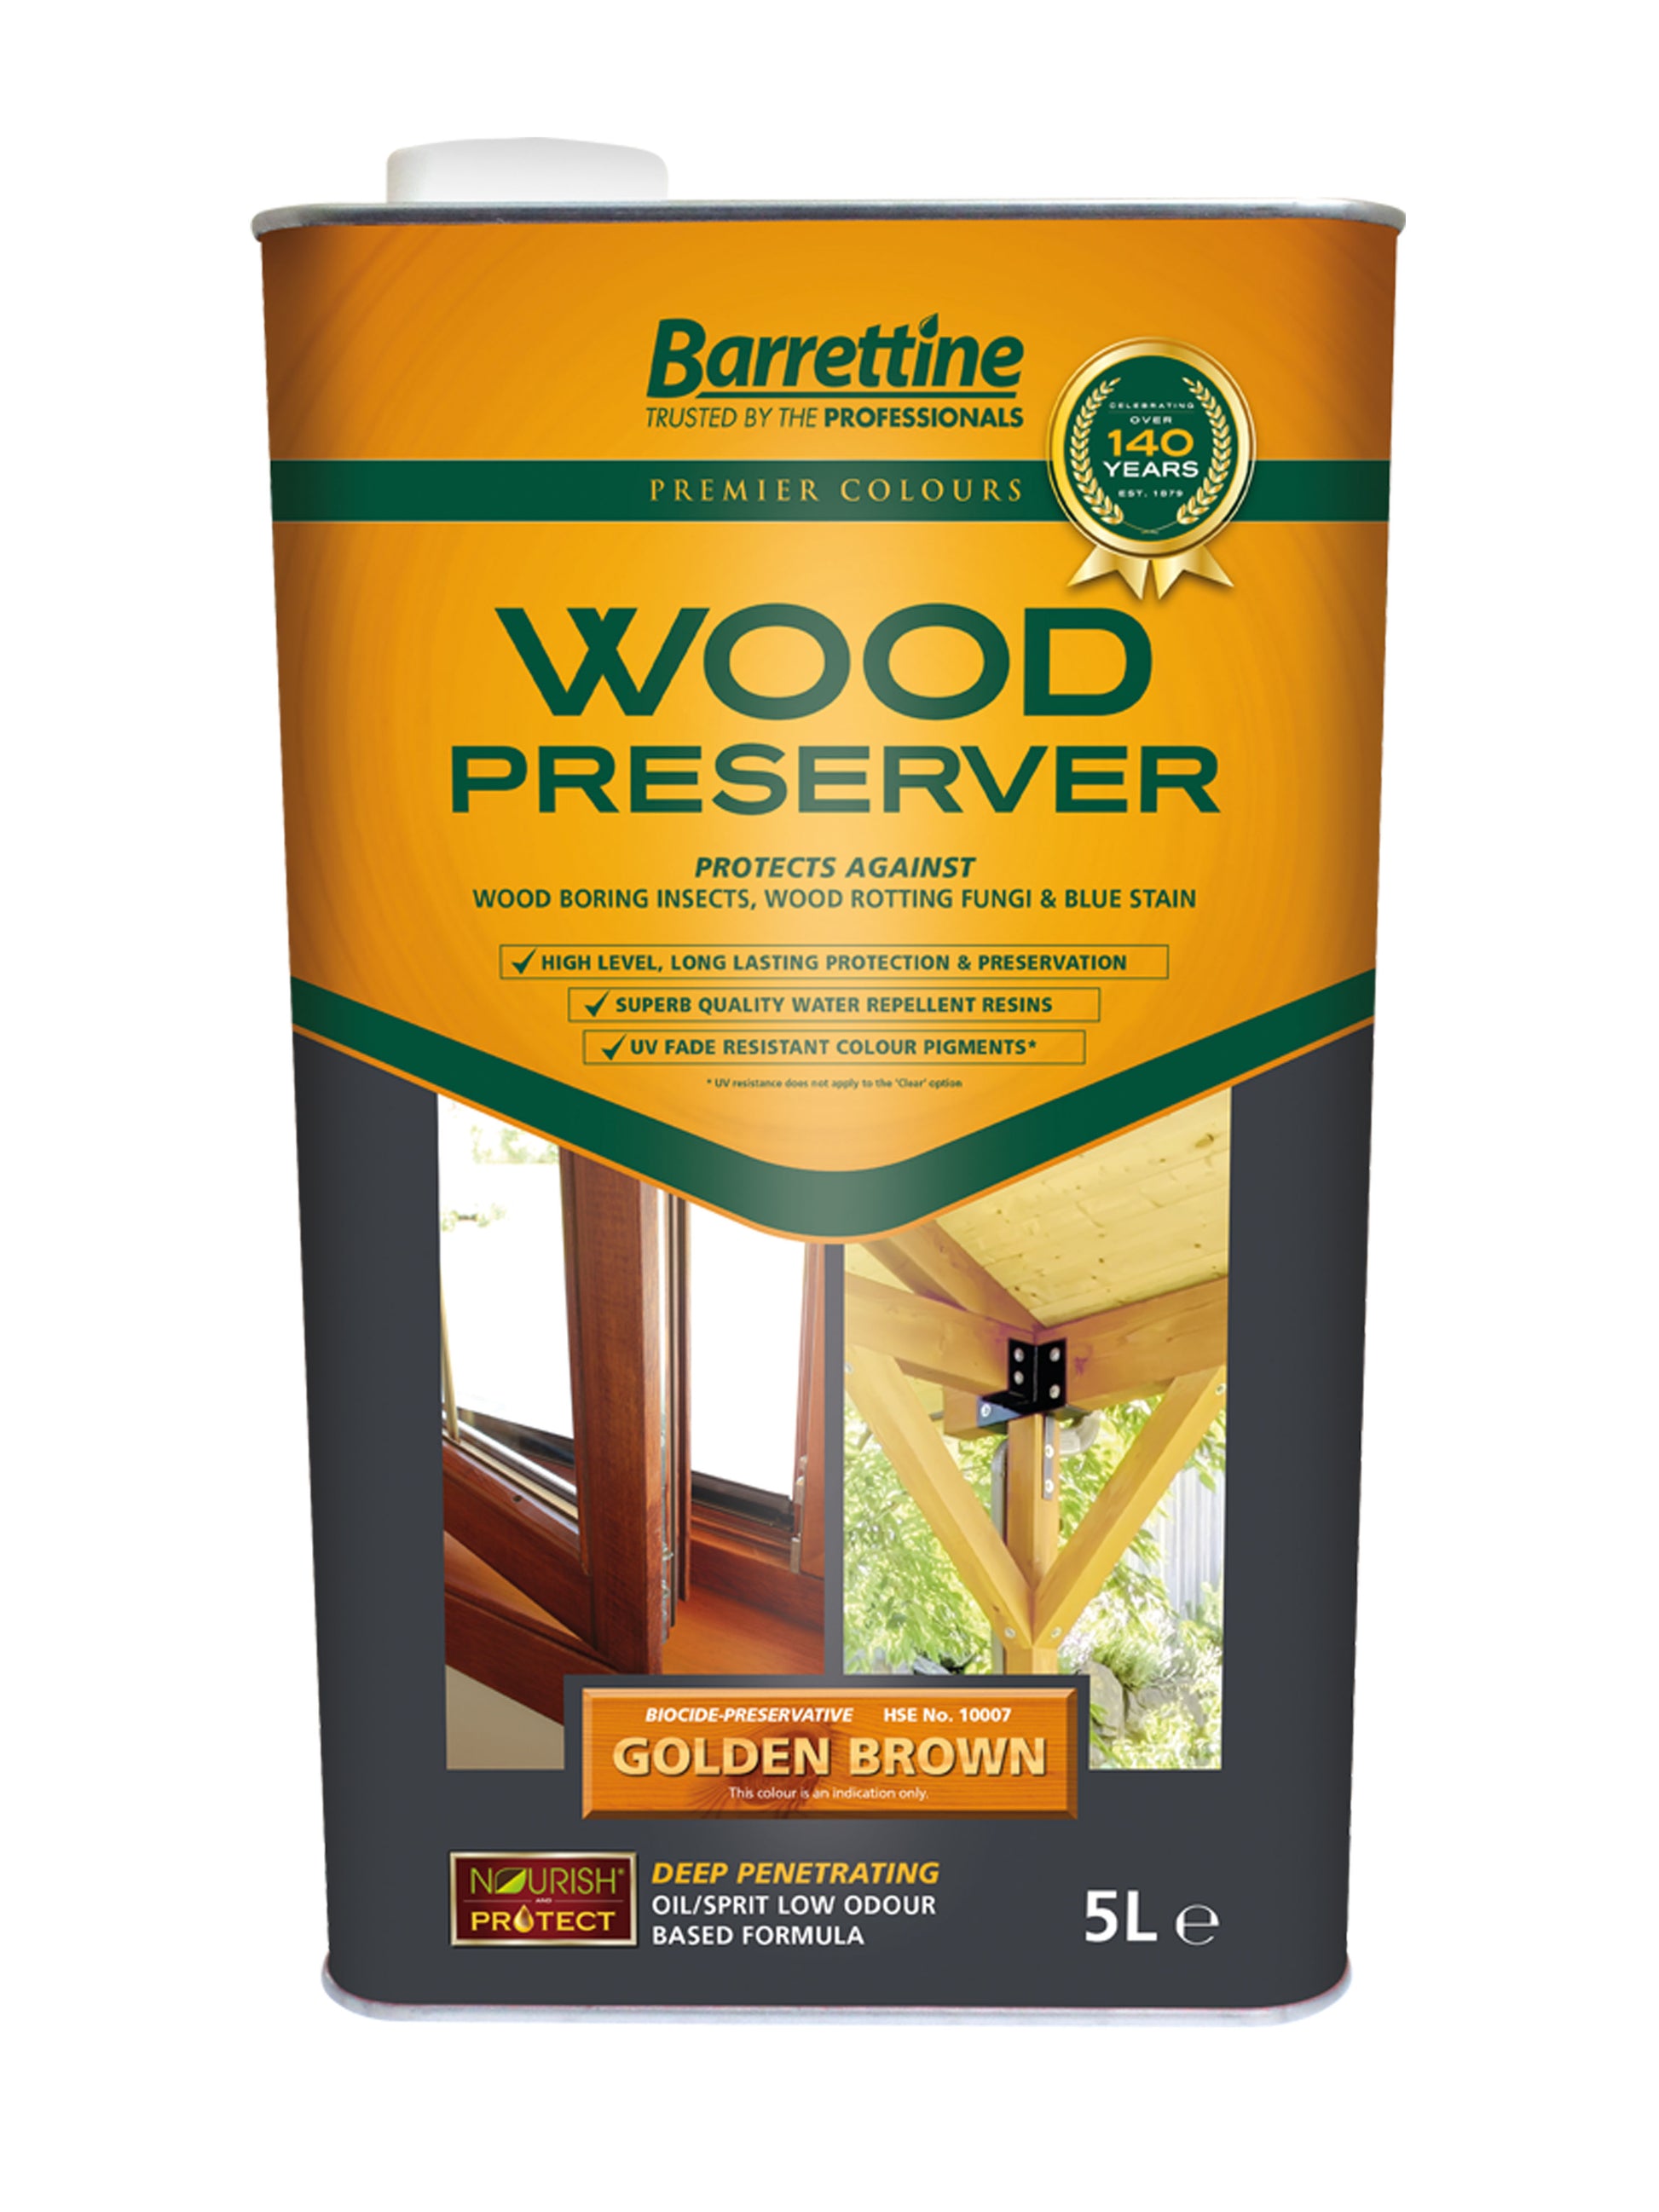 5L Wood Preserver Golden Brown Barrettine PREMIER Wood Preserver stain treatment protection exterior